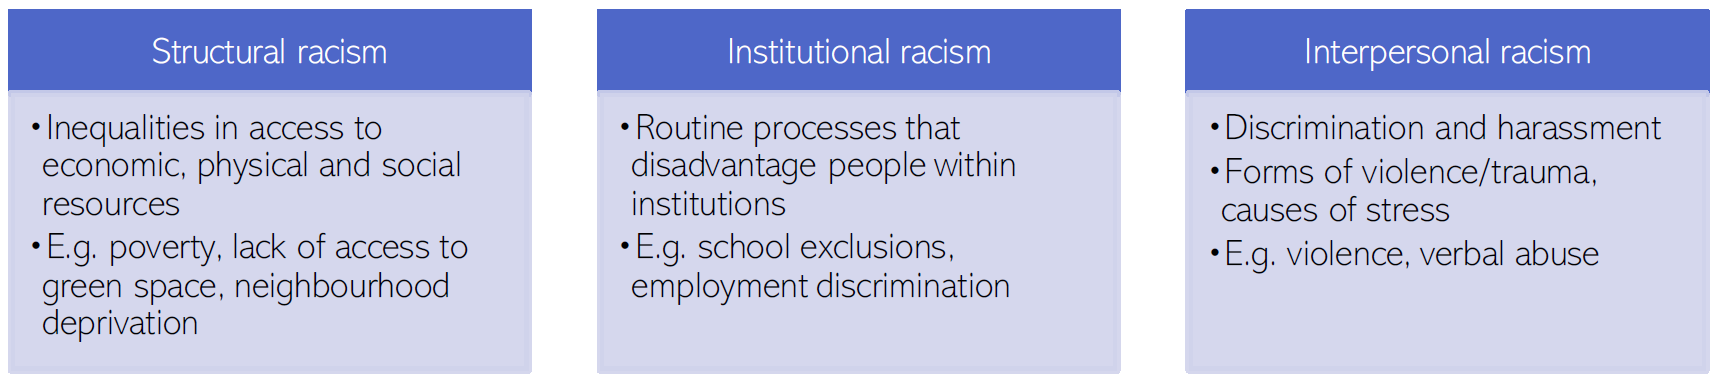 Structural, institutional and interpersonal racism all contribute to health inequalities 